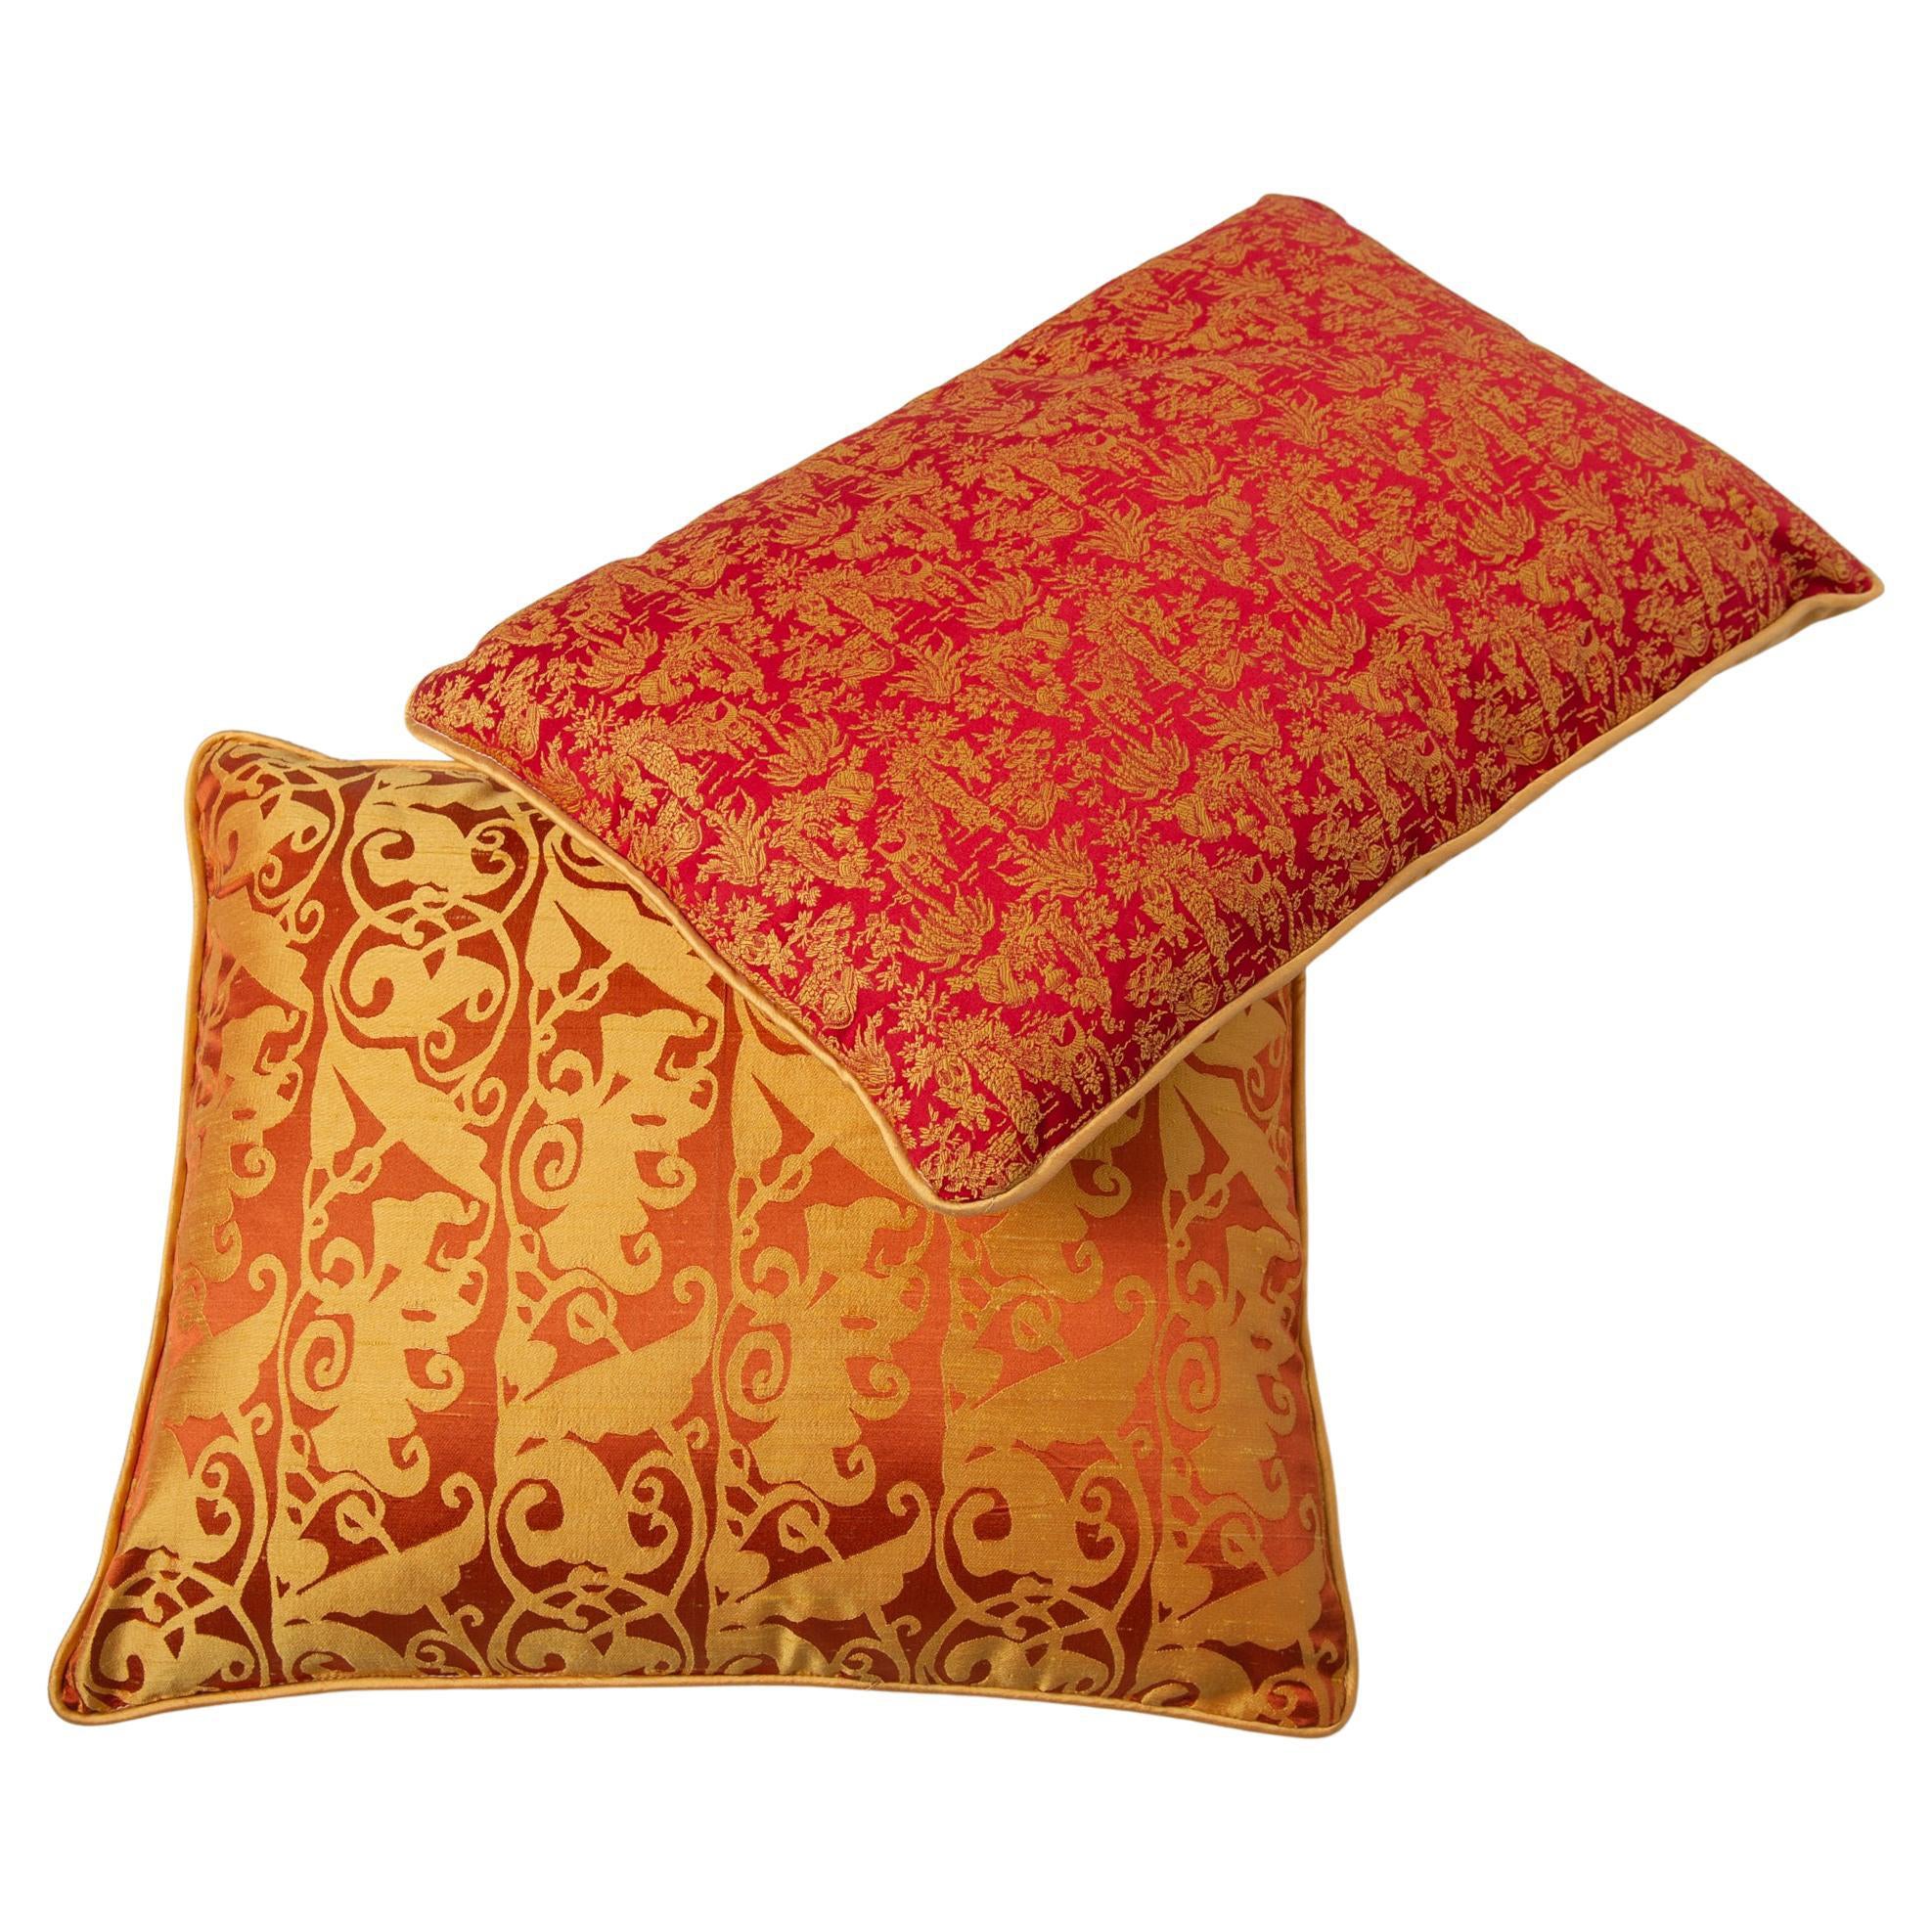 Only One Decorative Red  Pillow For Sale